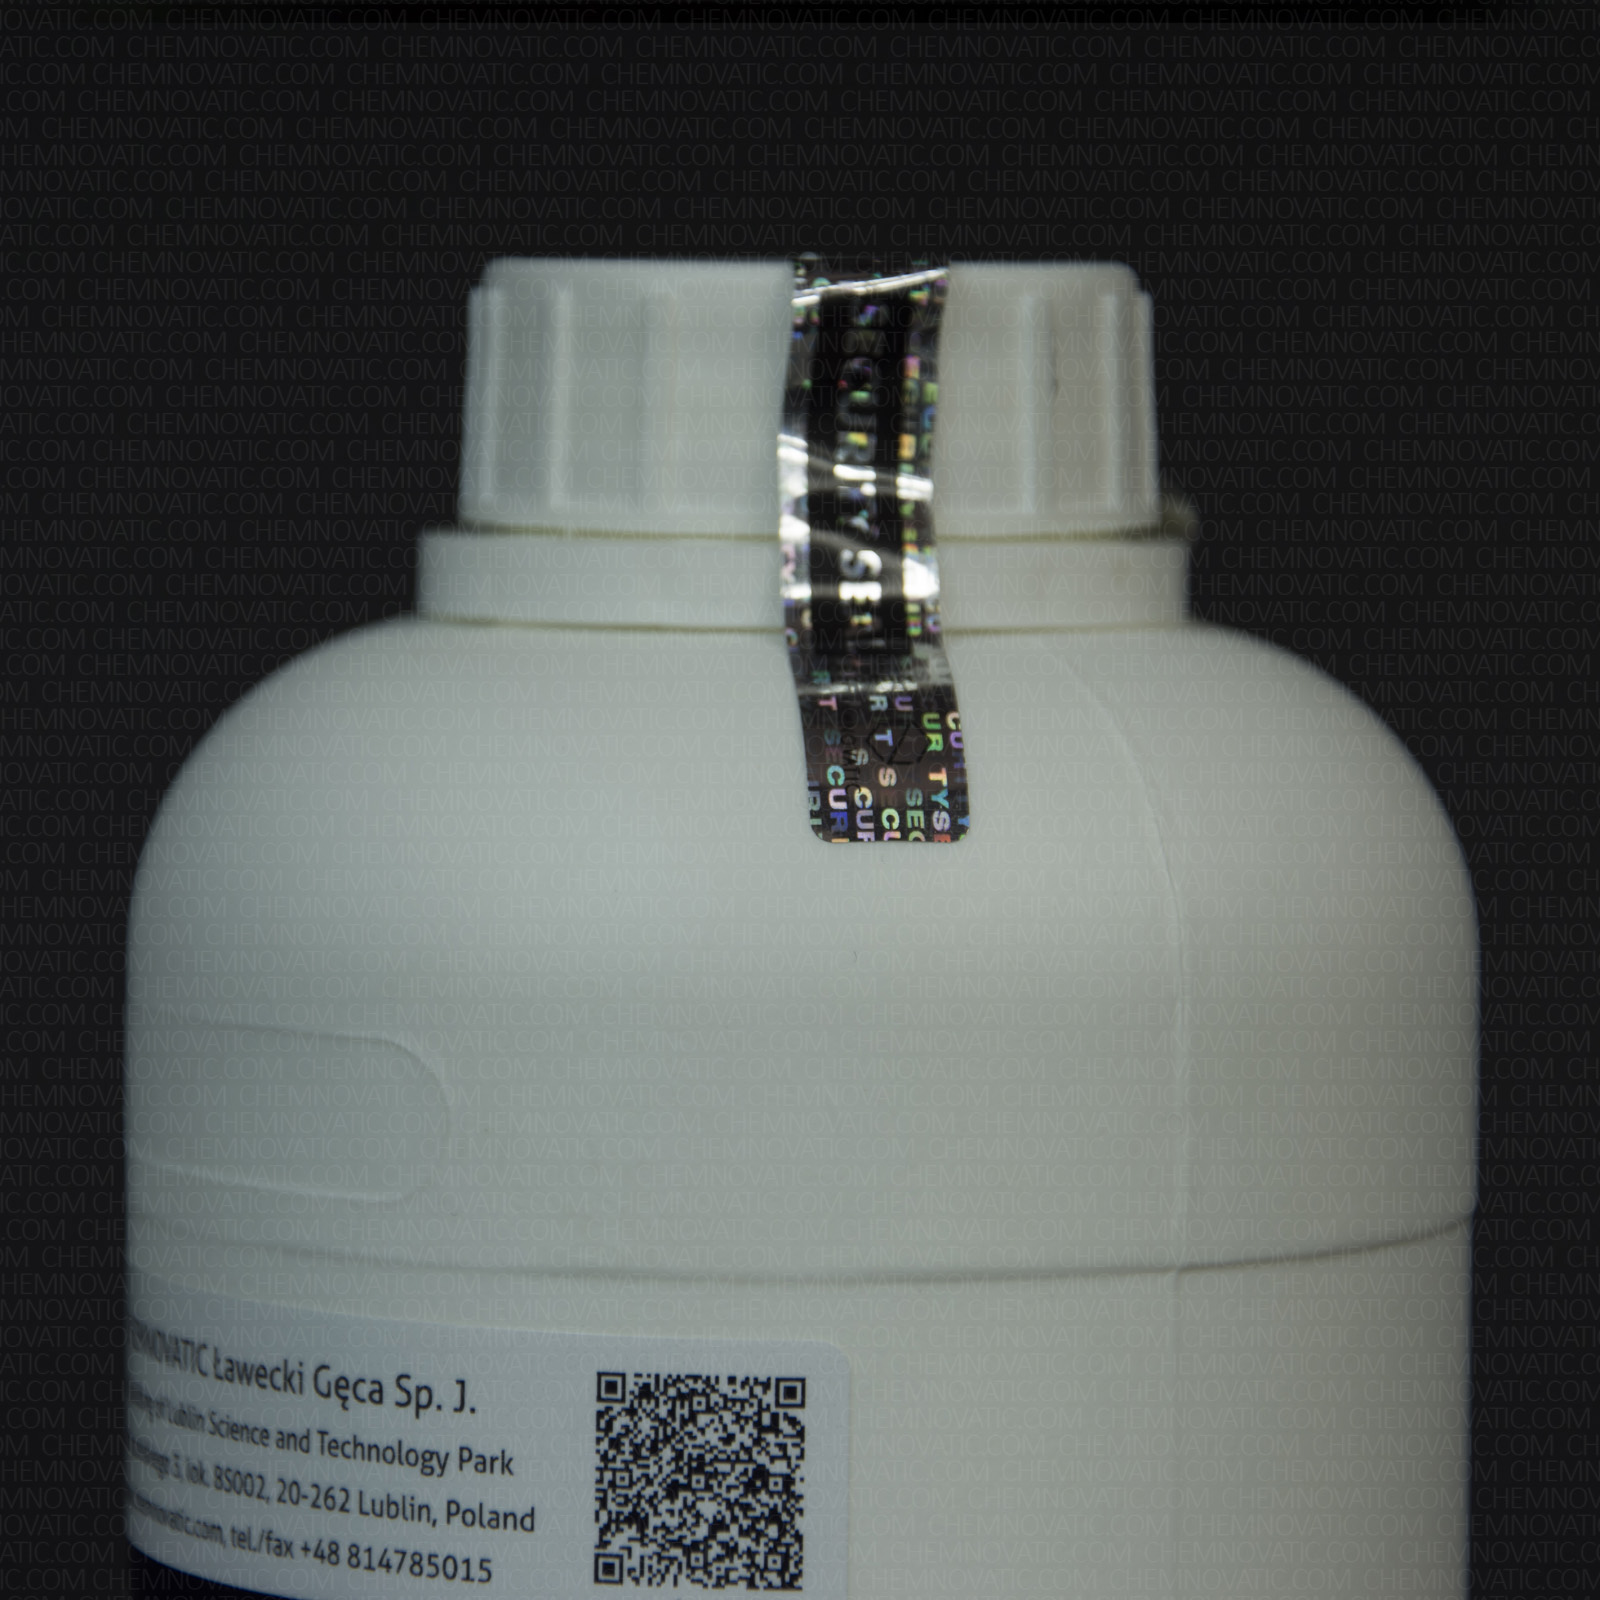 a security tape for purenic 99+ pure nicotine liquid introduced in 2016